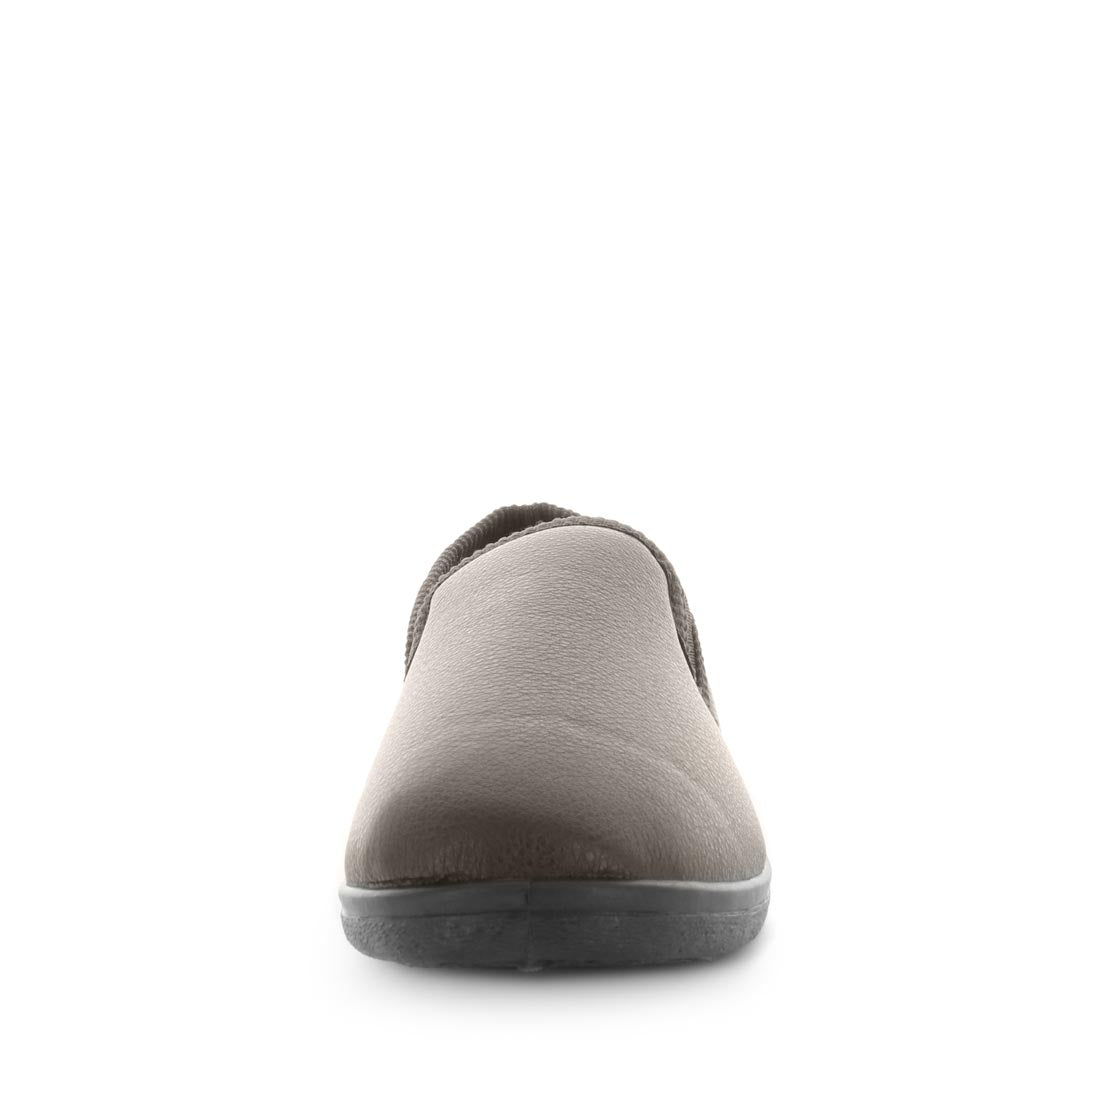 Classic mens slip on slipper, Edword by panda slippers. A grey check mens slipper made with soft materials and comfy fit design for the perfect indoor slipper.